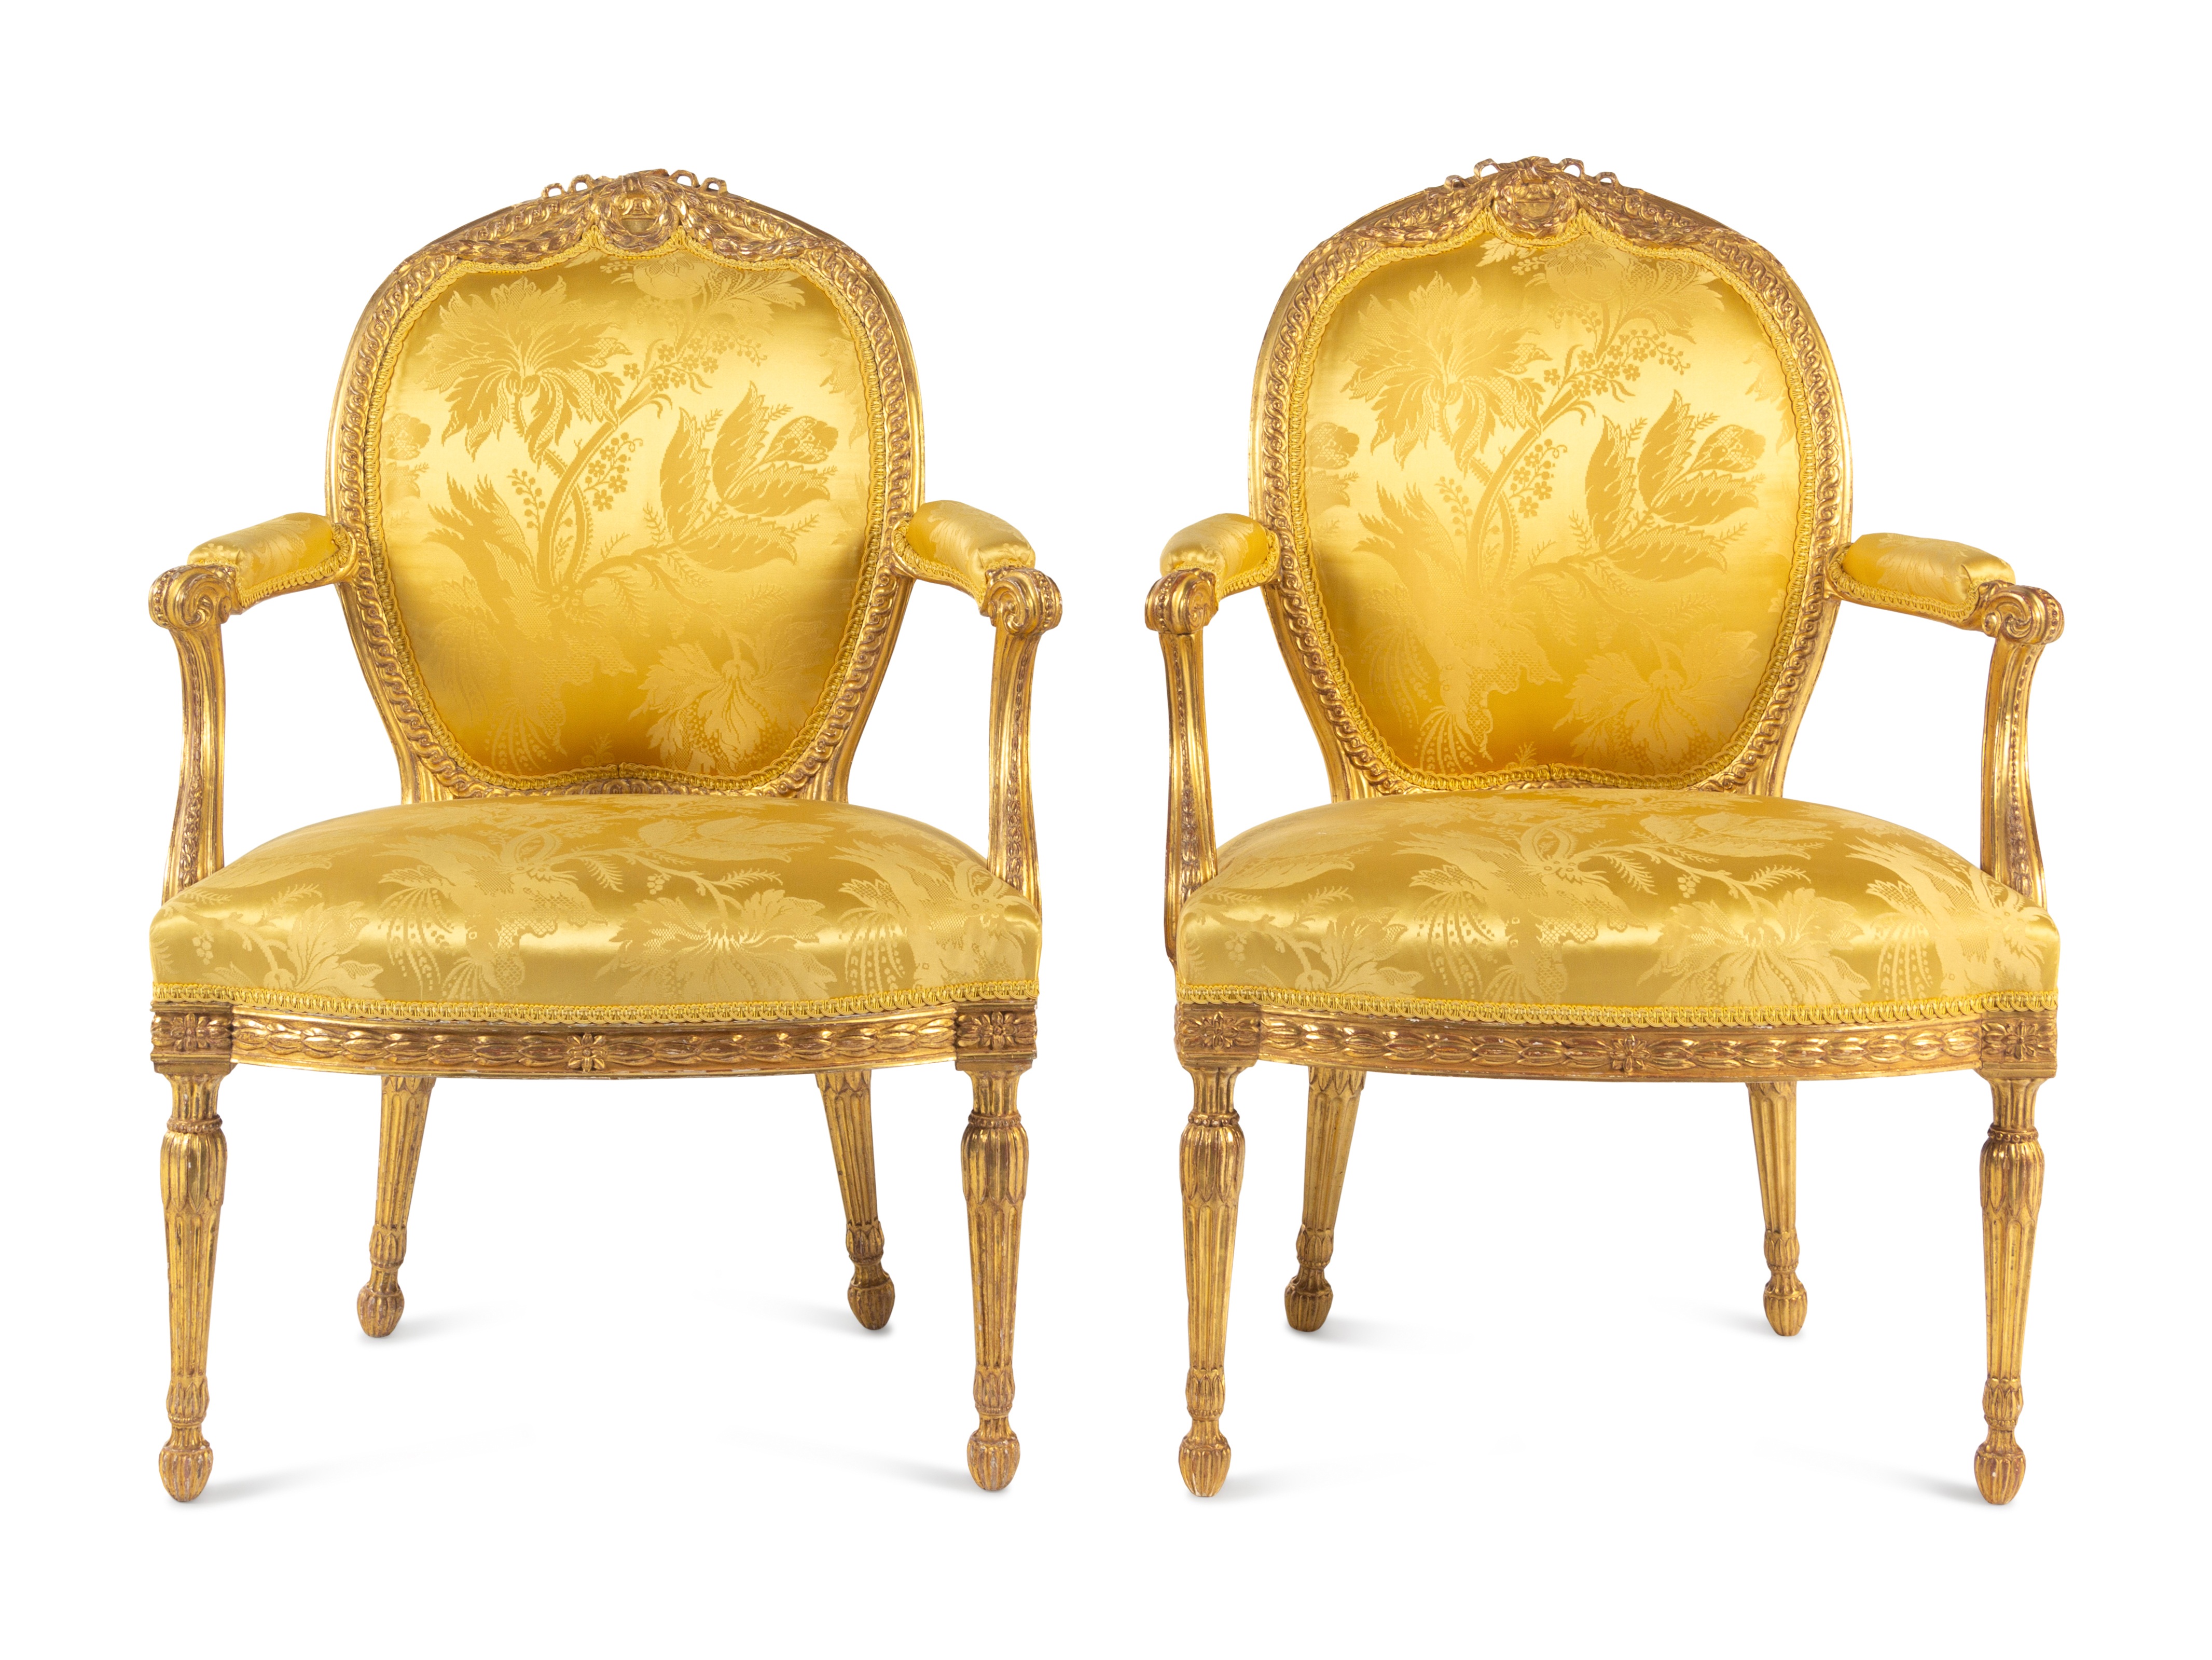 A Pair of George III Carved Giltwood Armchairs